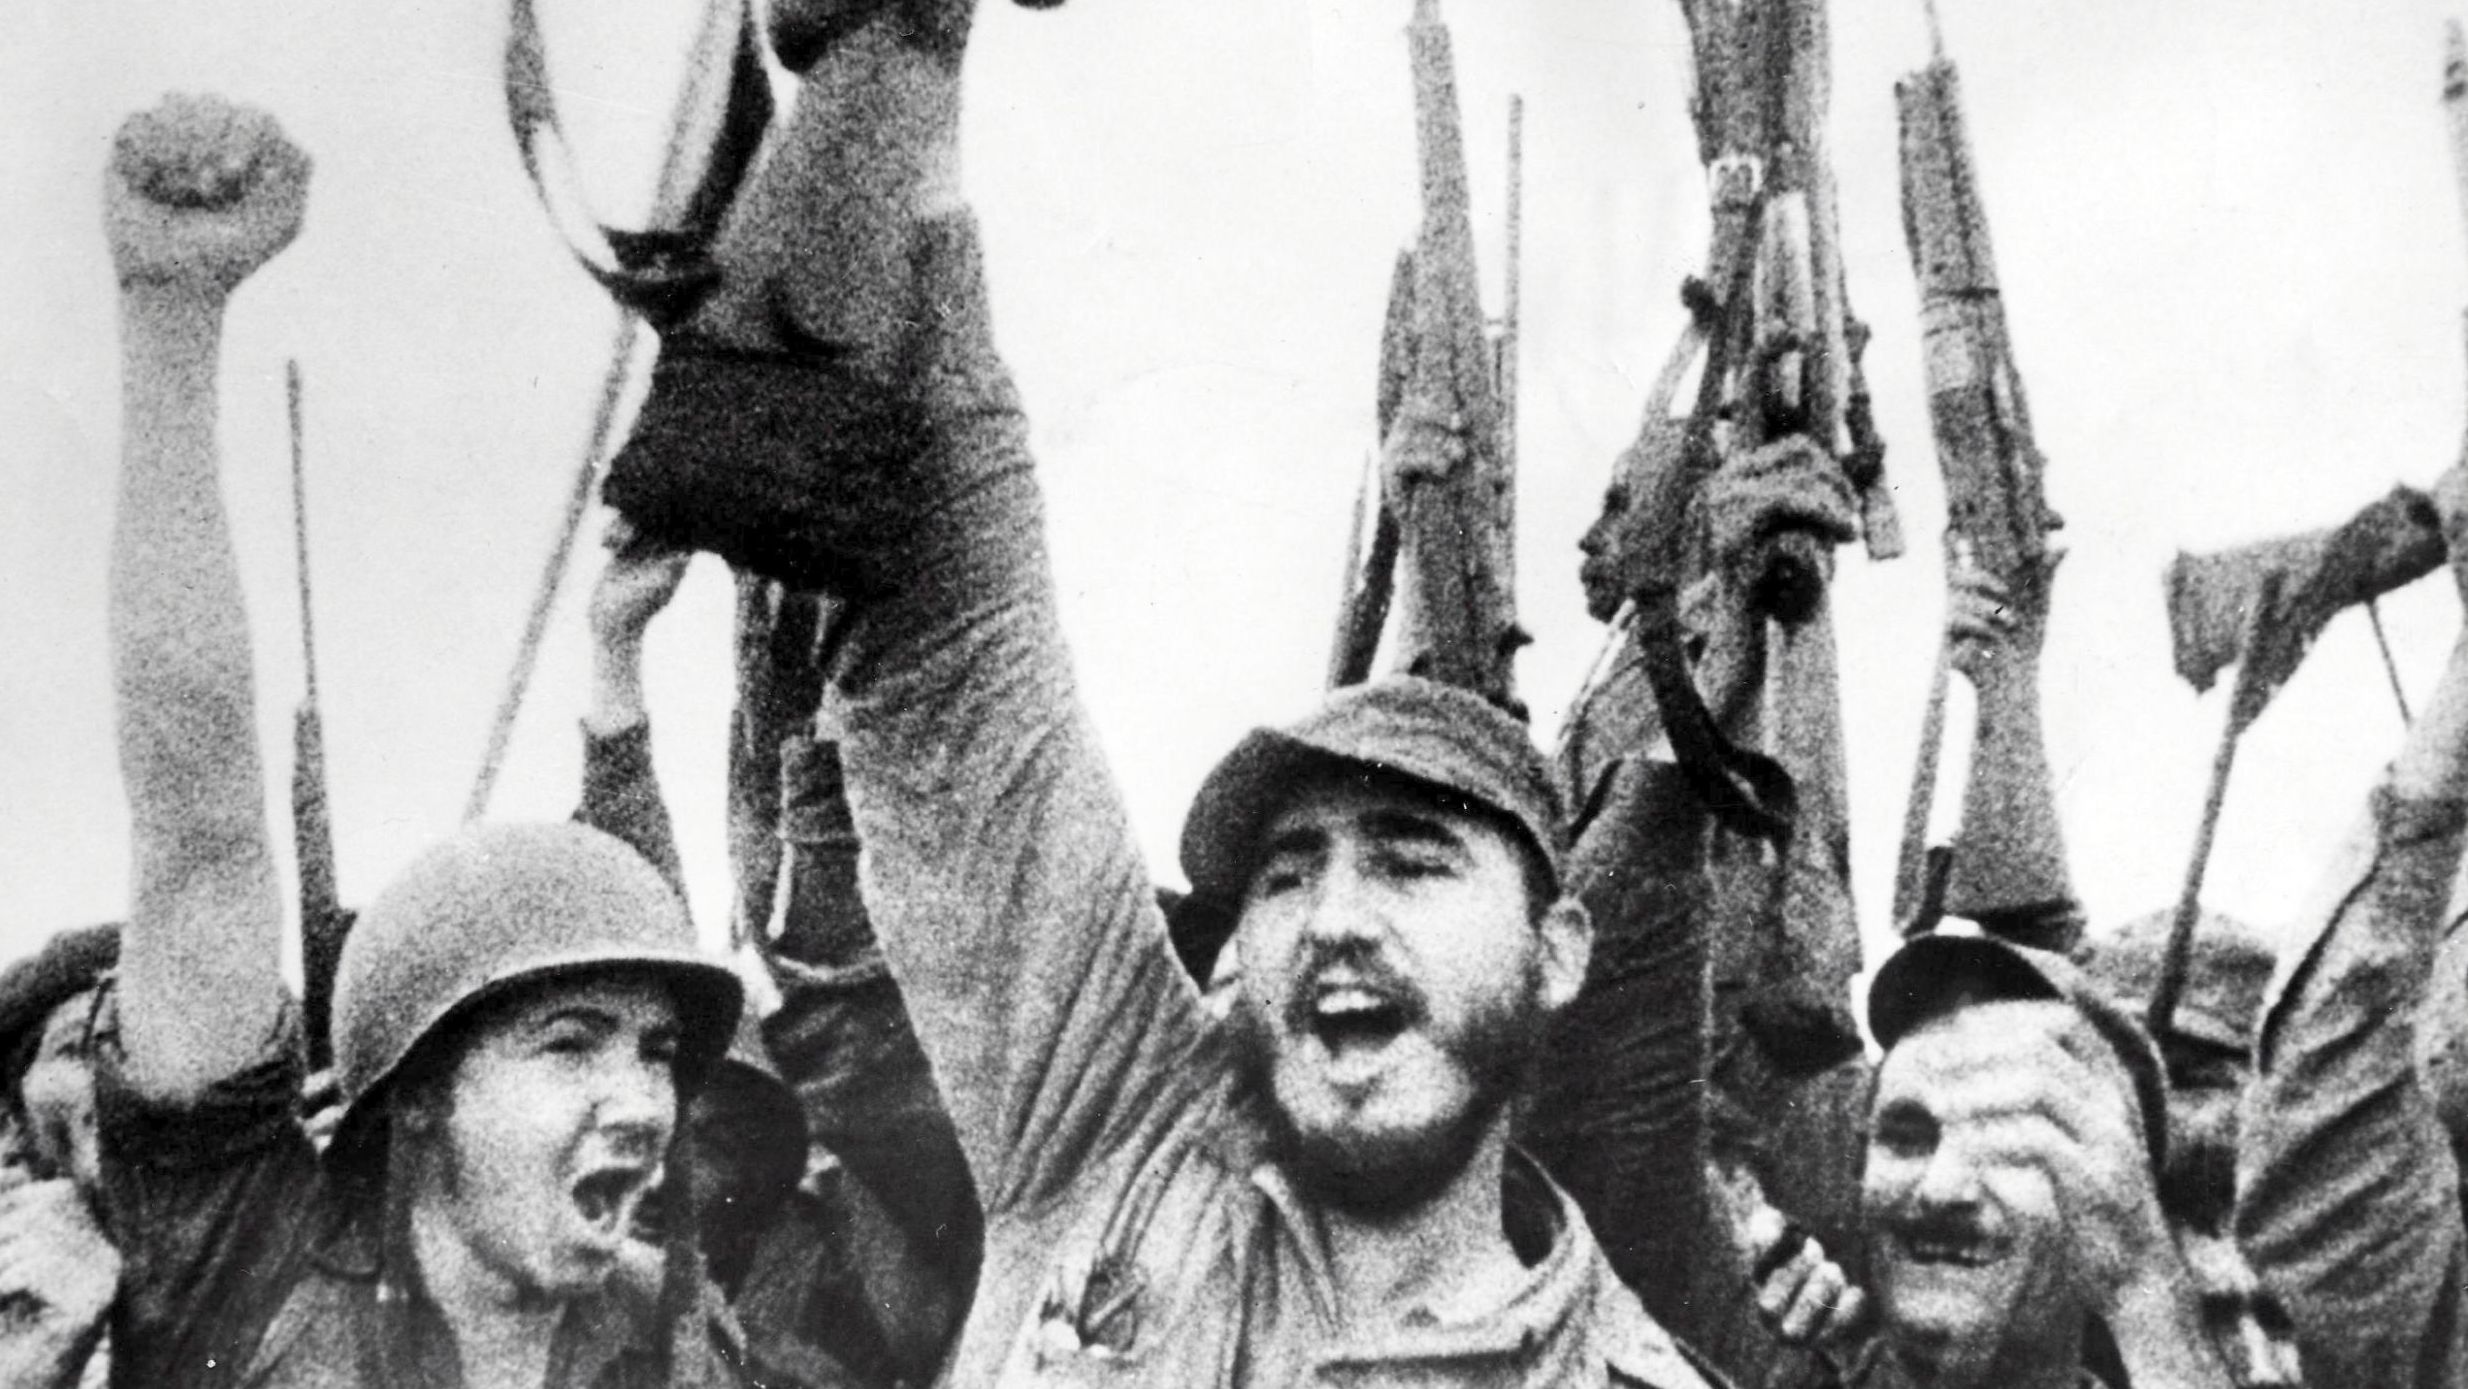 In 1959, leftist forces under Fidel Castro overthrew the government of Fulgencio Batista in Cuba. Castro soon nationalized the sugar industry and signed trade agreements with the Soviet Union. The next year, his government seized US assets on the island.